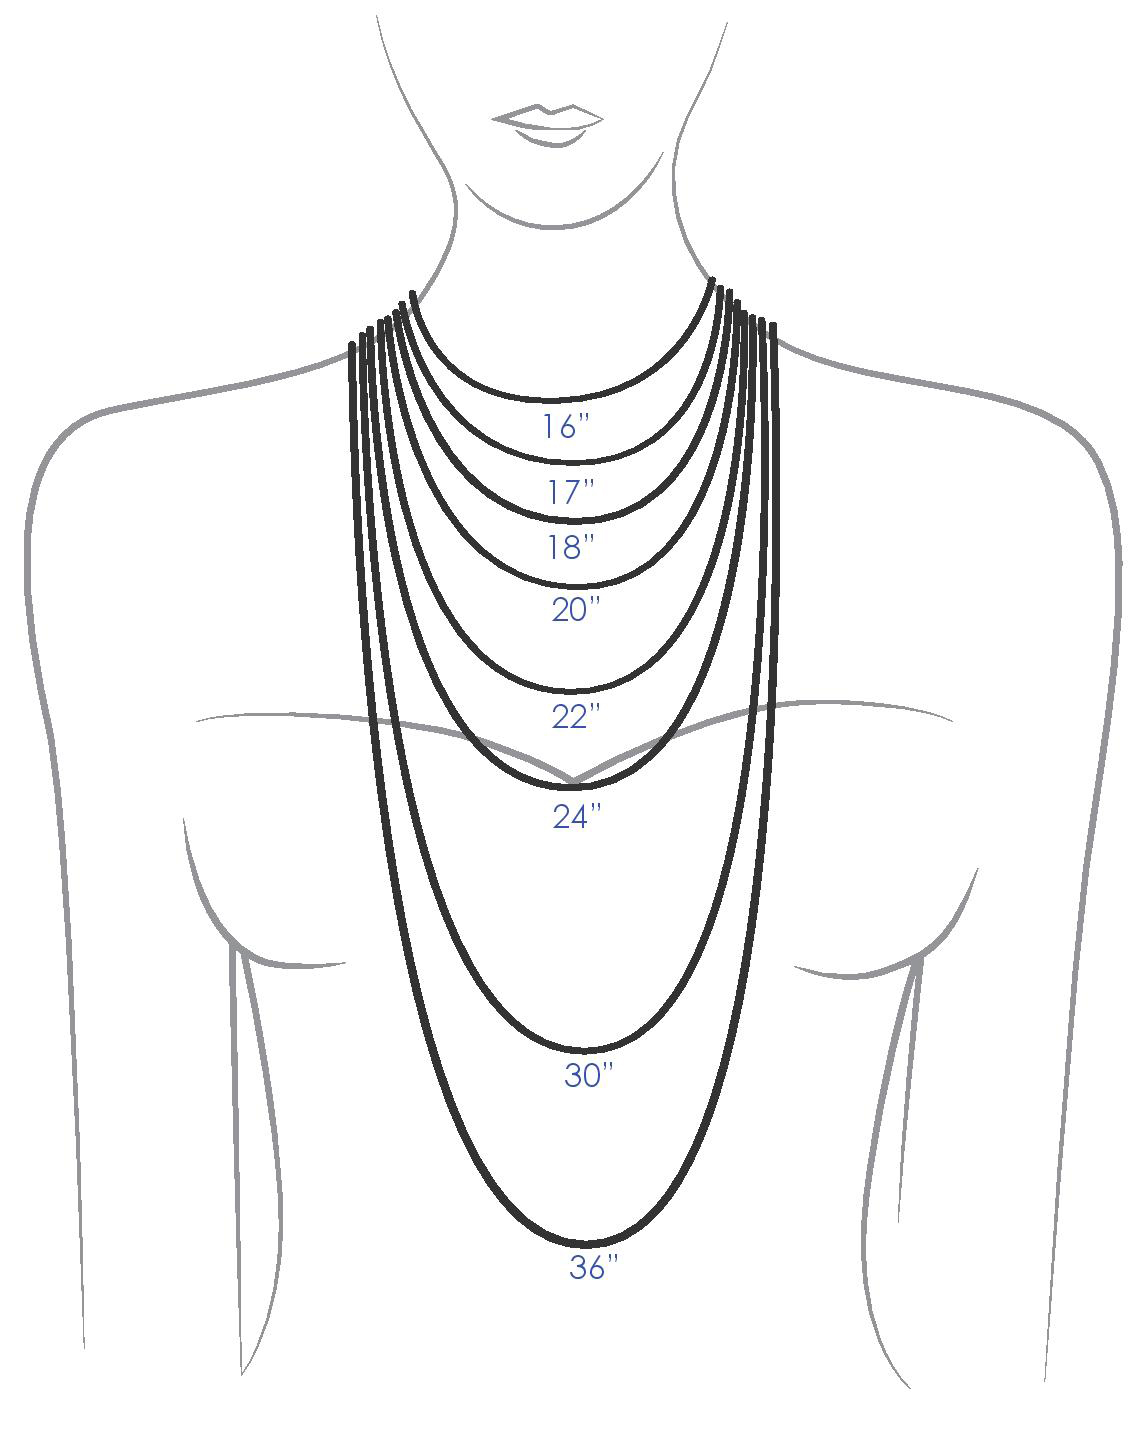 Necklace Length & Size Charts: How to choose the right length? | Tiffany &  Co.